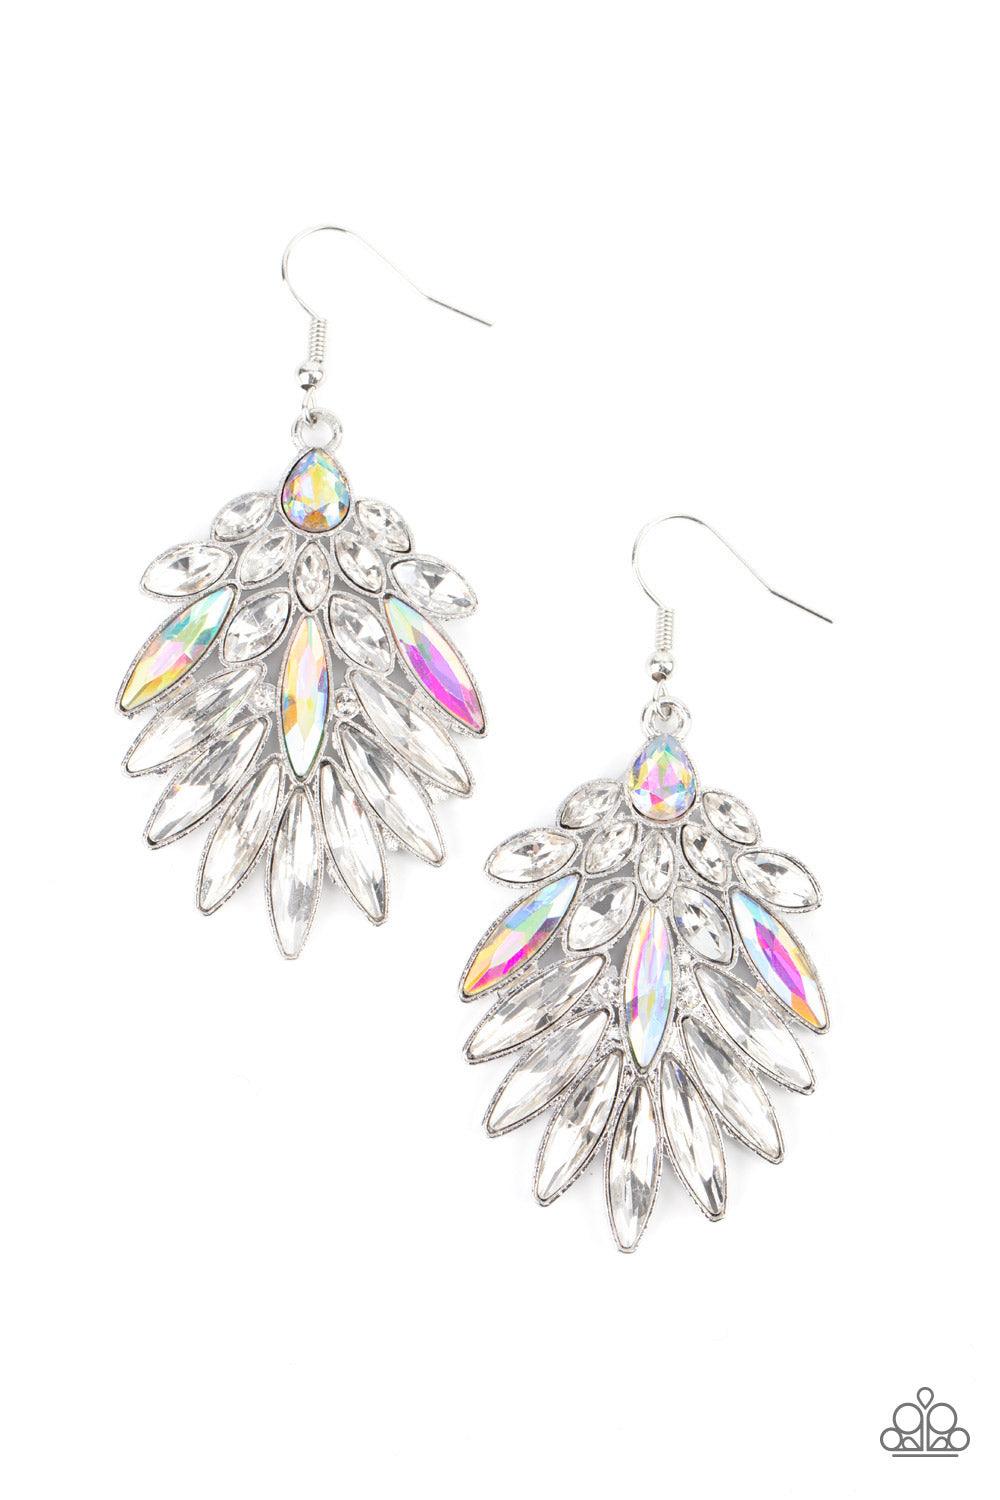 Paparazzi Accessories COSMIC-politan An iridescent/Silver teardrop rhinestone gives way to a sparkly fan of classic white and oblong iridescent marquise cut rhinestones, coalescing into an out-of-this-world statement piece. Earring attaches to a standard